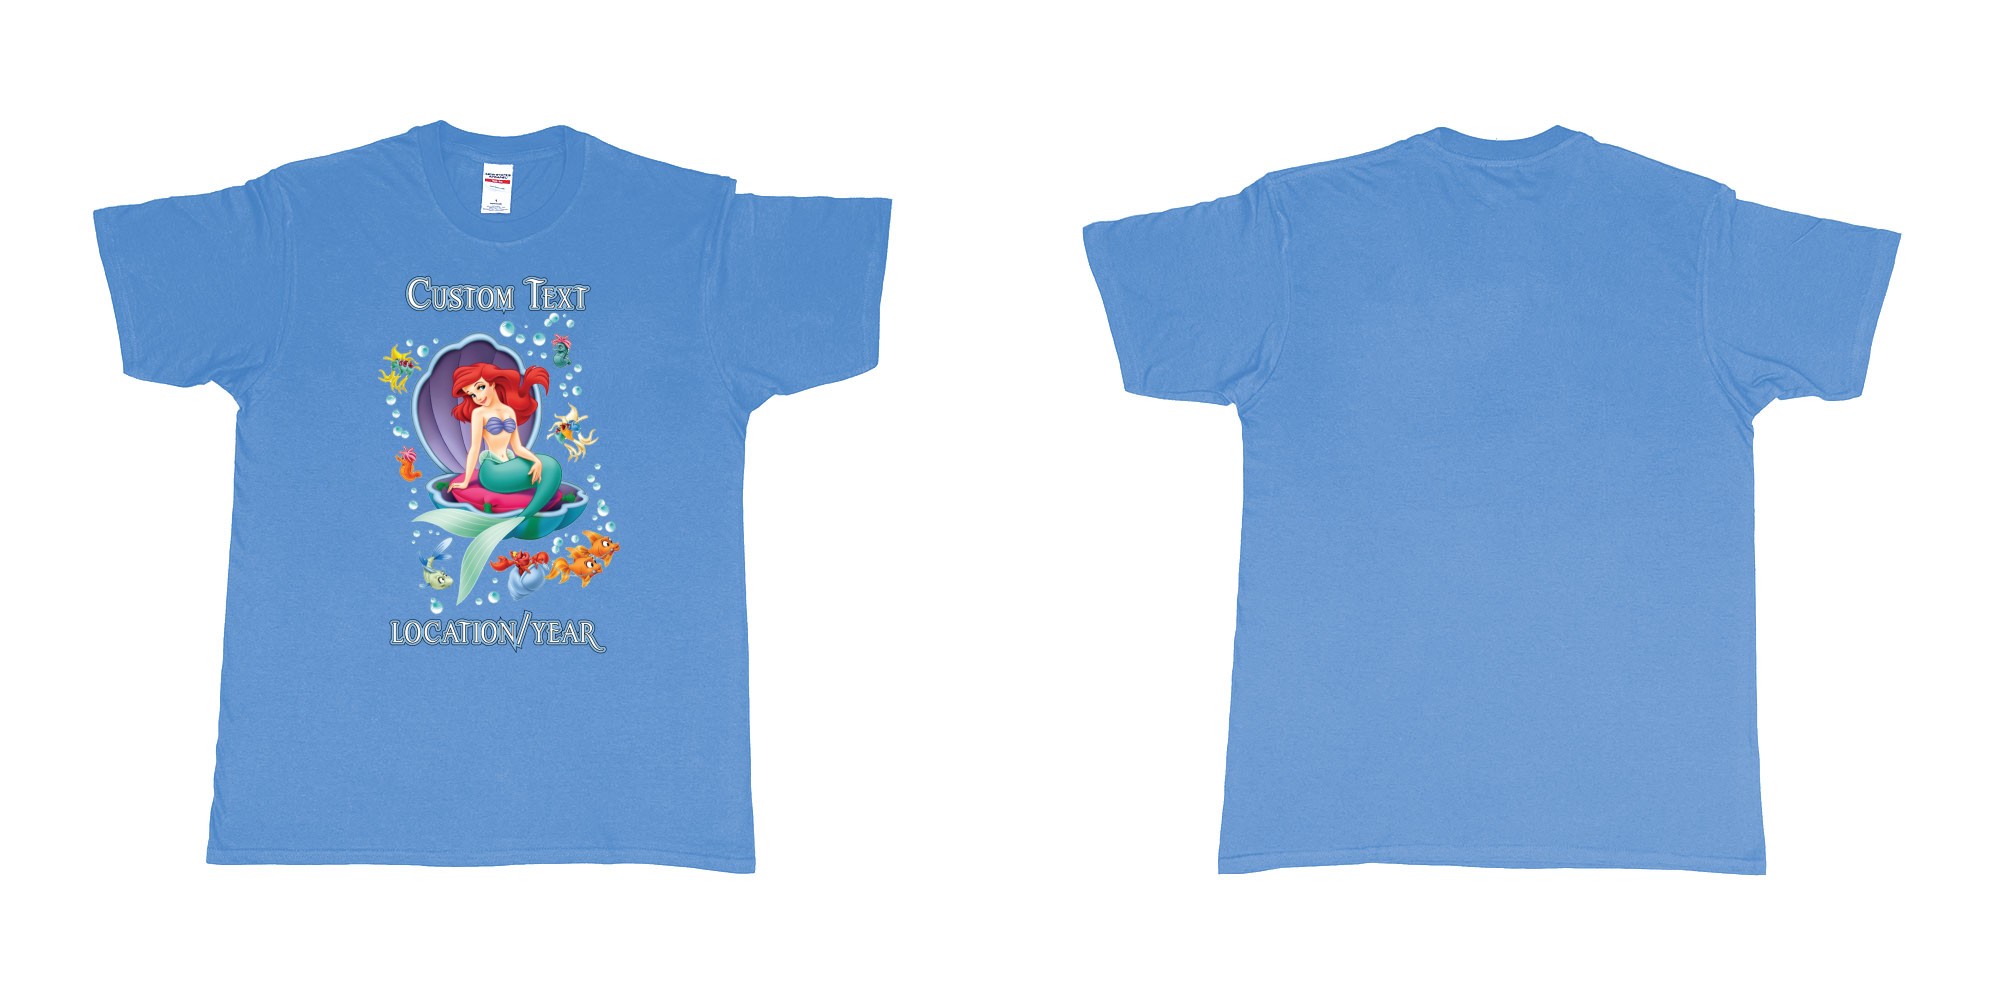 Custom tshirt design little mermaid shell birthday in fabric color carolina-blue choice your own text made in Bali by The Pirate Way